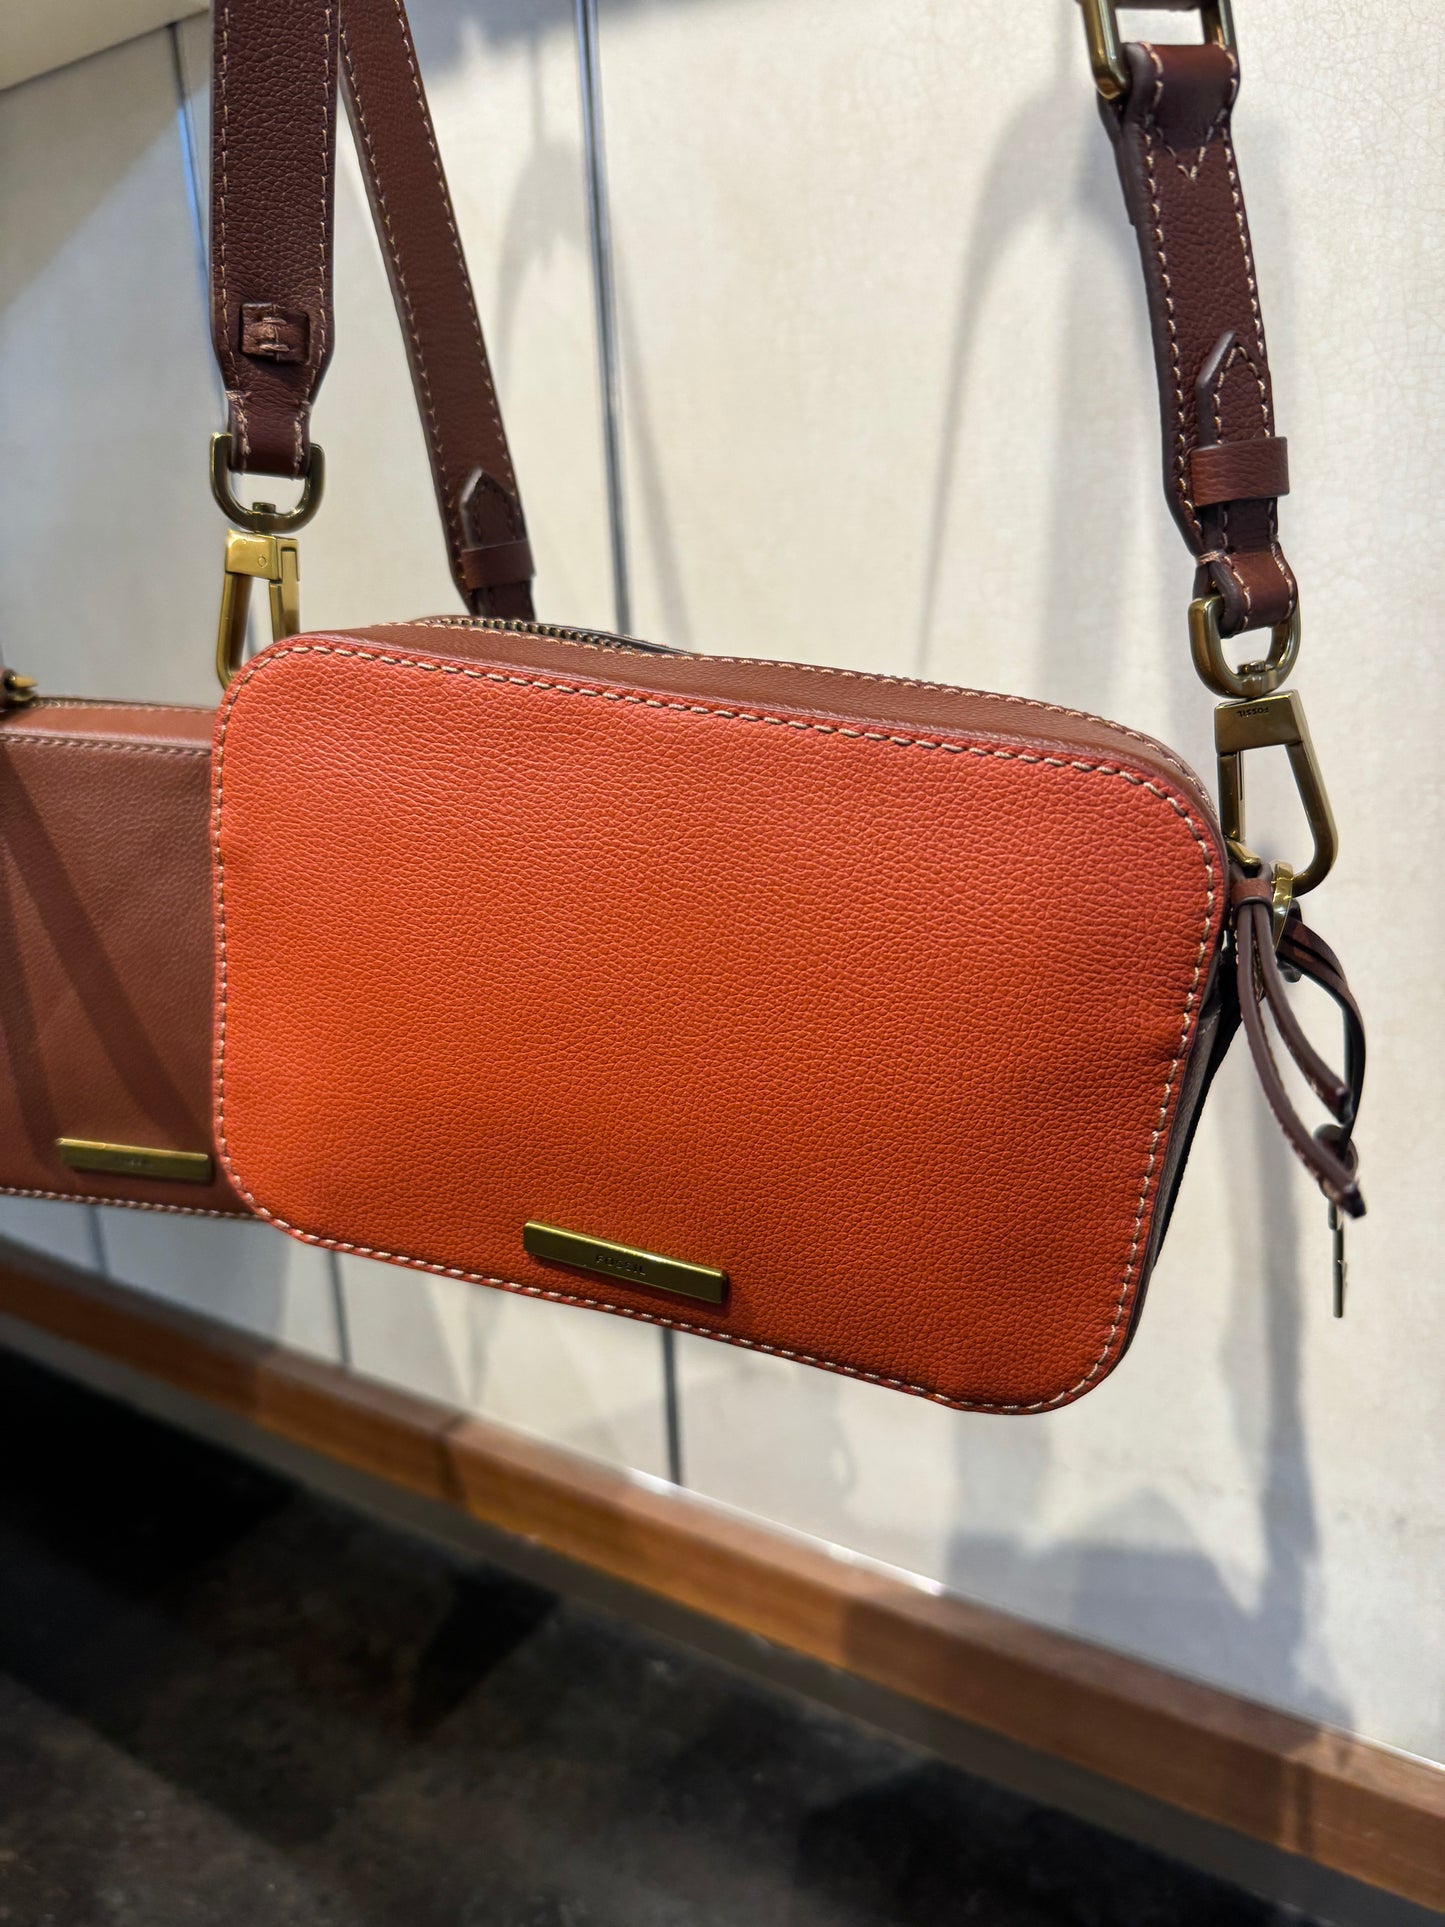 Fossil Bryce Small Crossbody In Red Clay (Pre-Order)